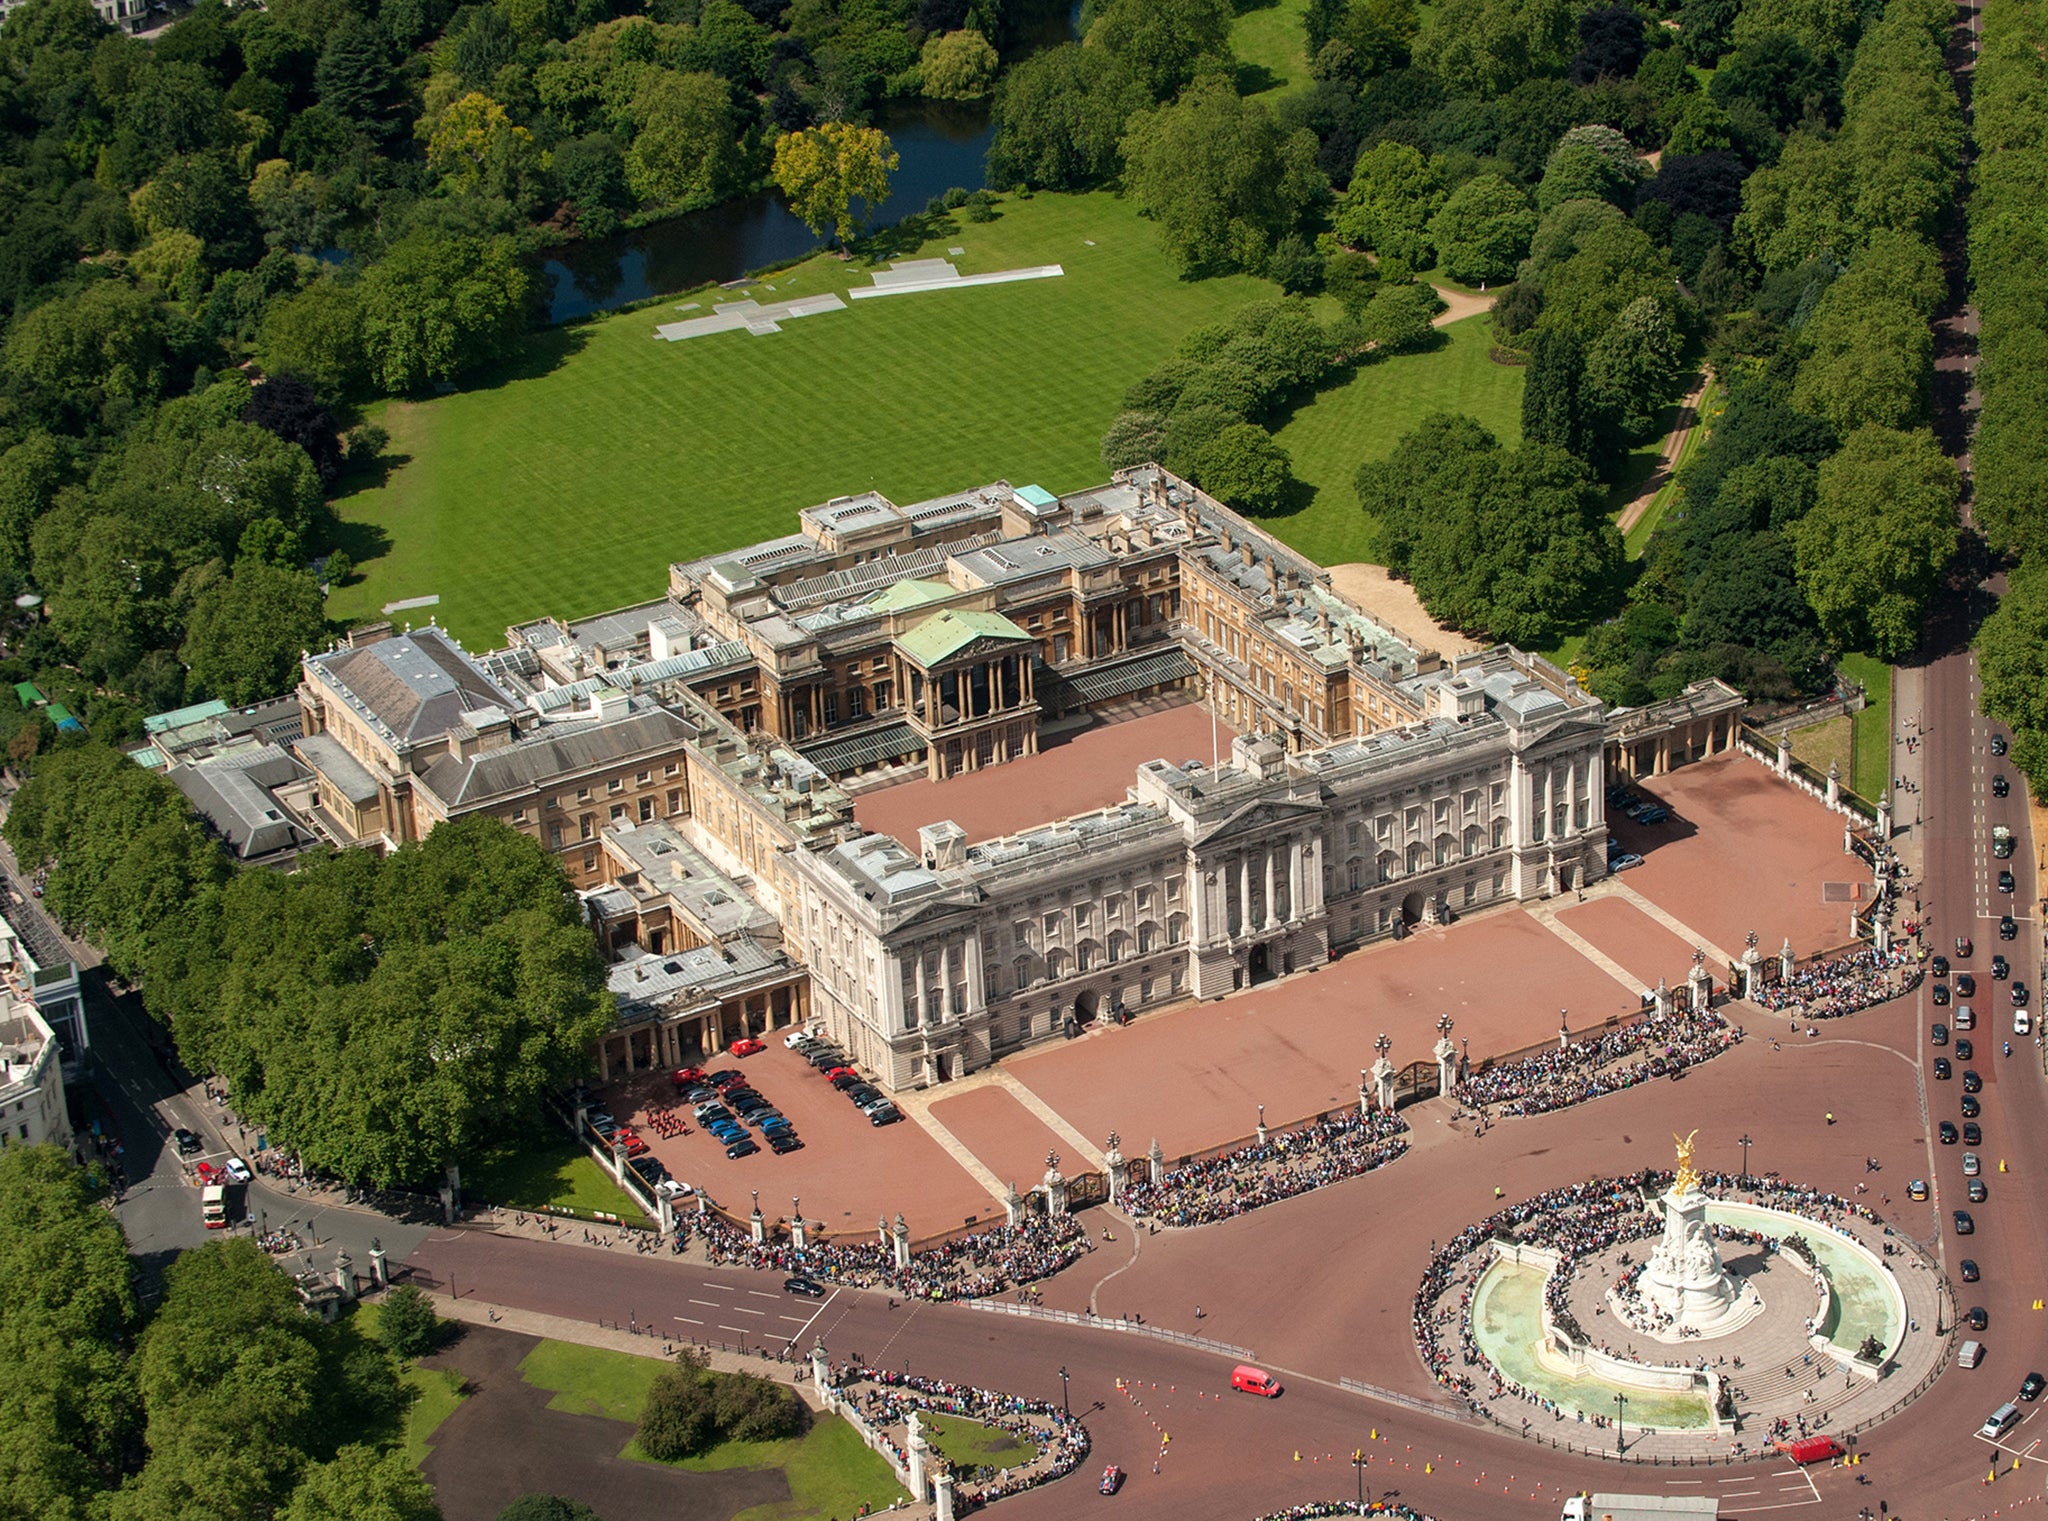 Buckingham Palace has declined to comment on the security incident